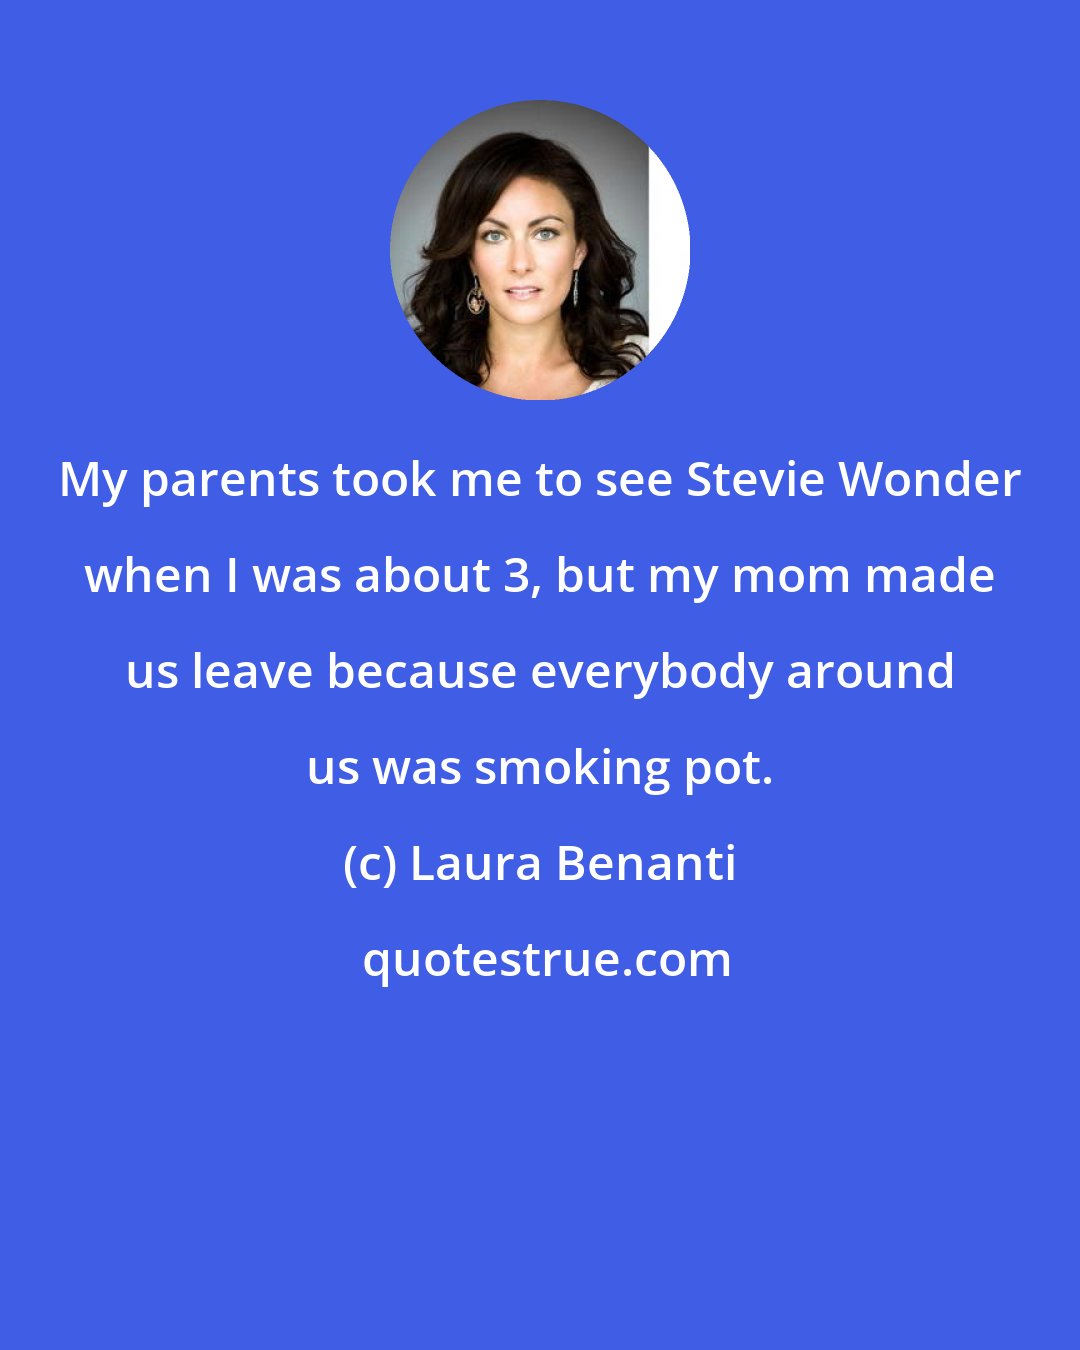 Laura Benanti: My parents took me to see Stevie Wonder when I was about 3, but my mom made us leave because everybody around us was smoking pot.